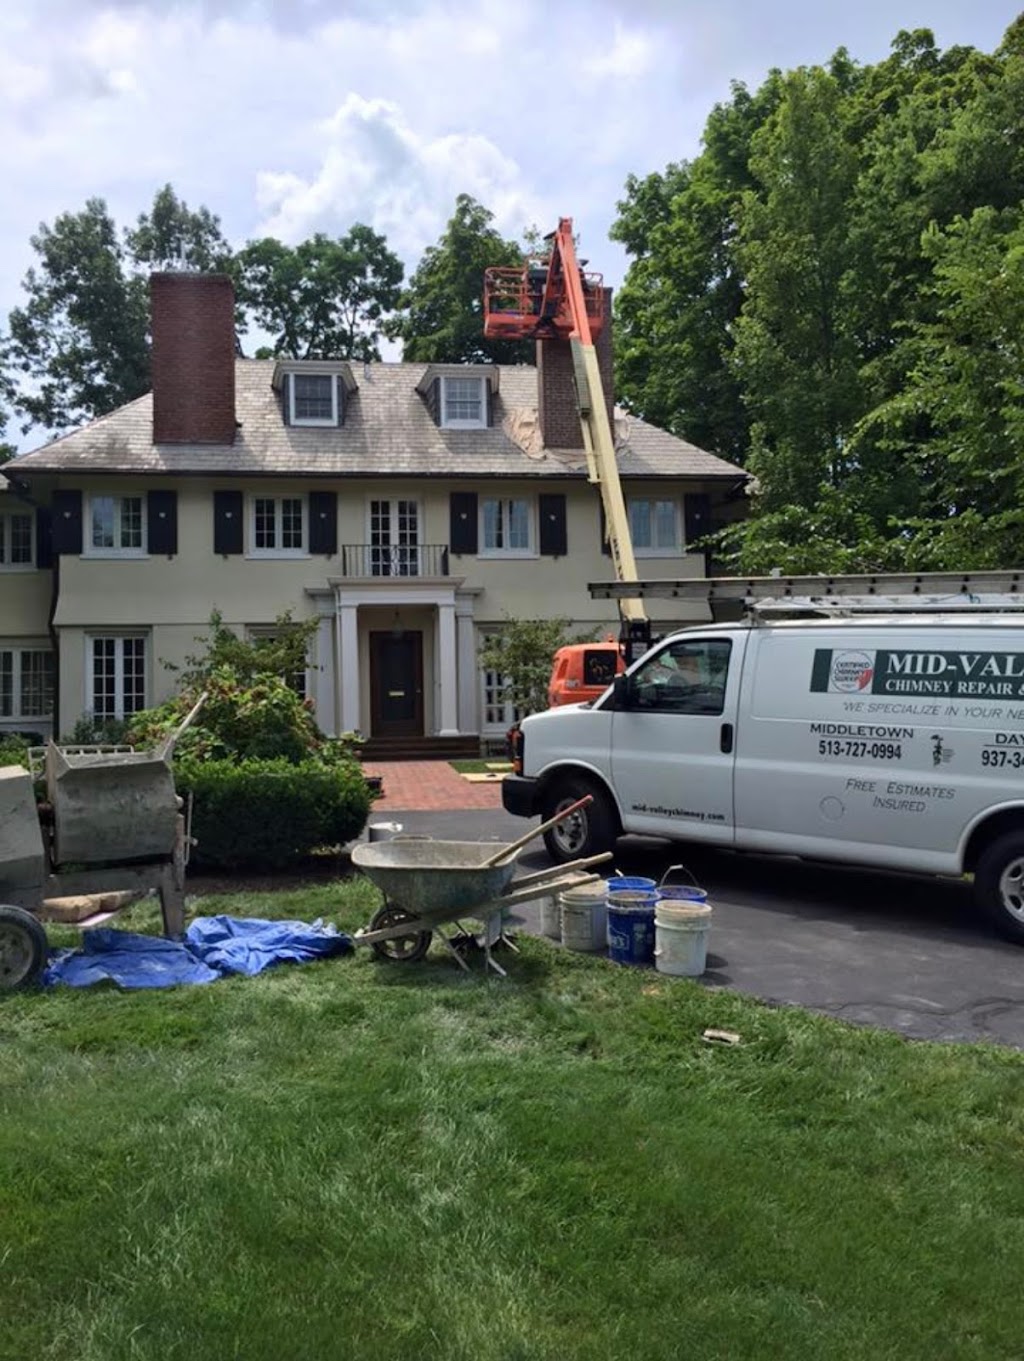 Mid-Valley Chimney Repair & Sweeps | 320 Conover Dr, Franklin, OH 45005 | Phone: (513) 727-0994